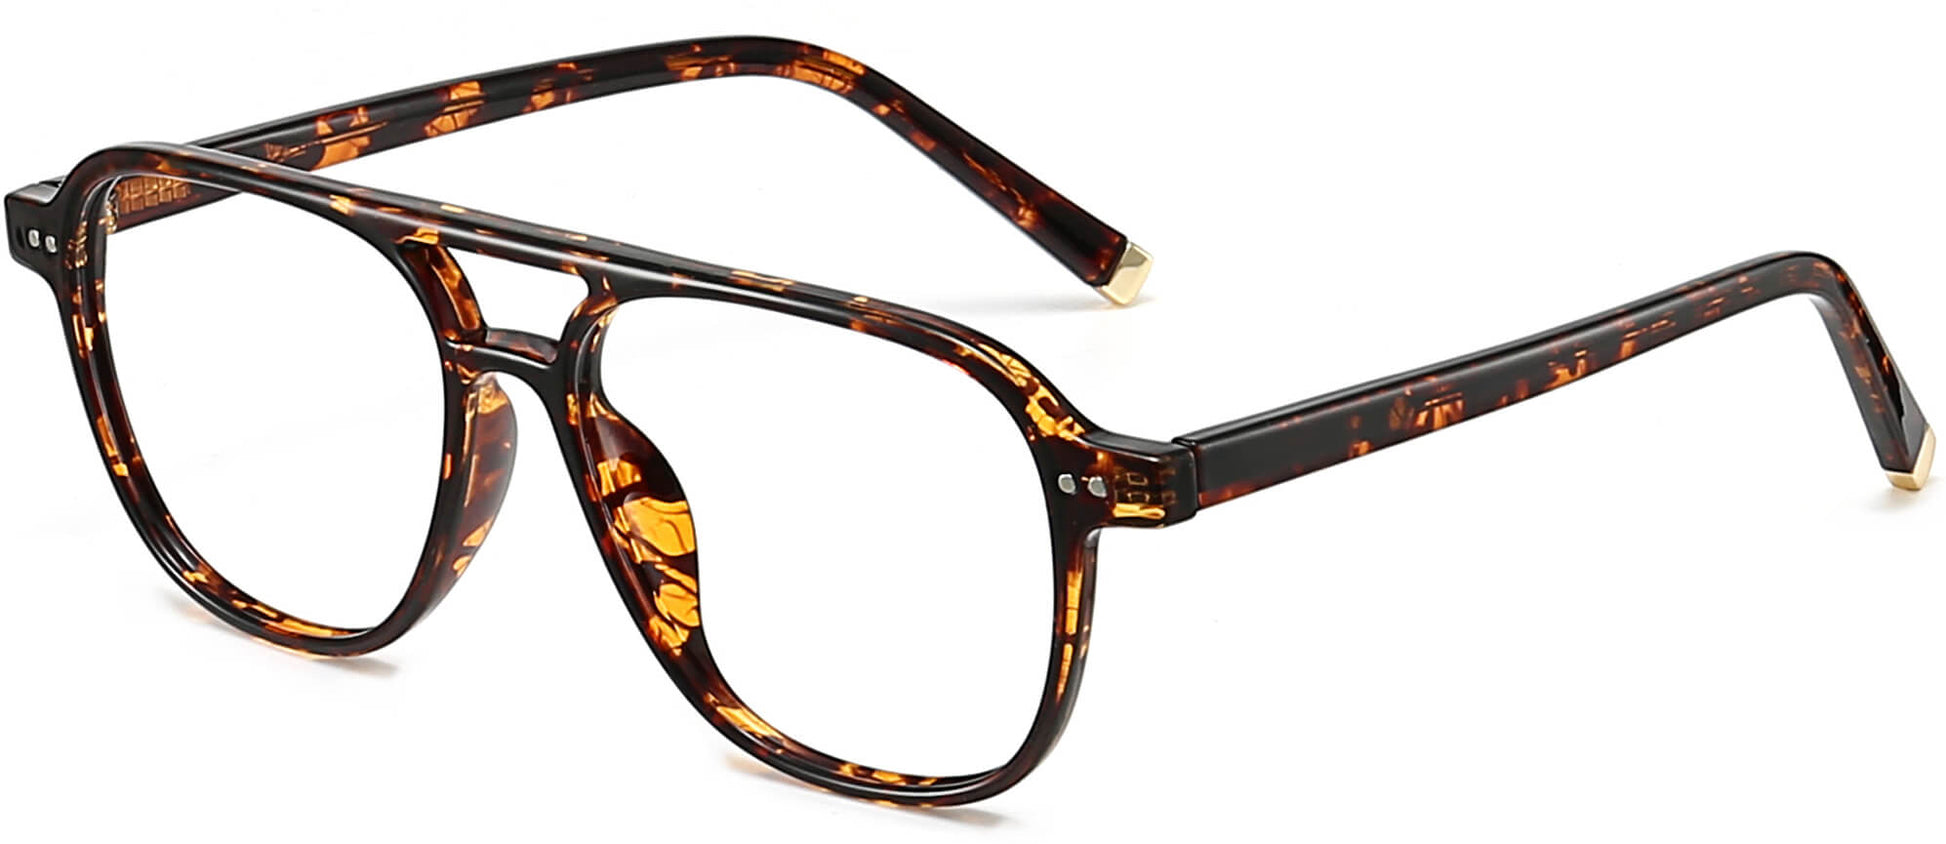 Haisley Square Tortoise Eyeglasses from ANRRI, angle view